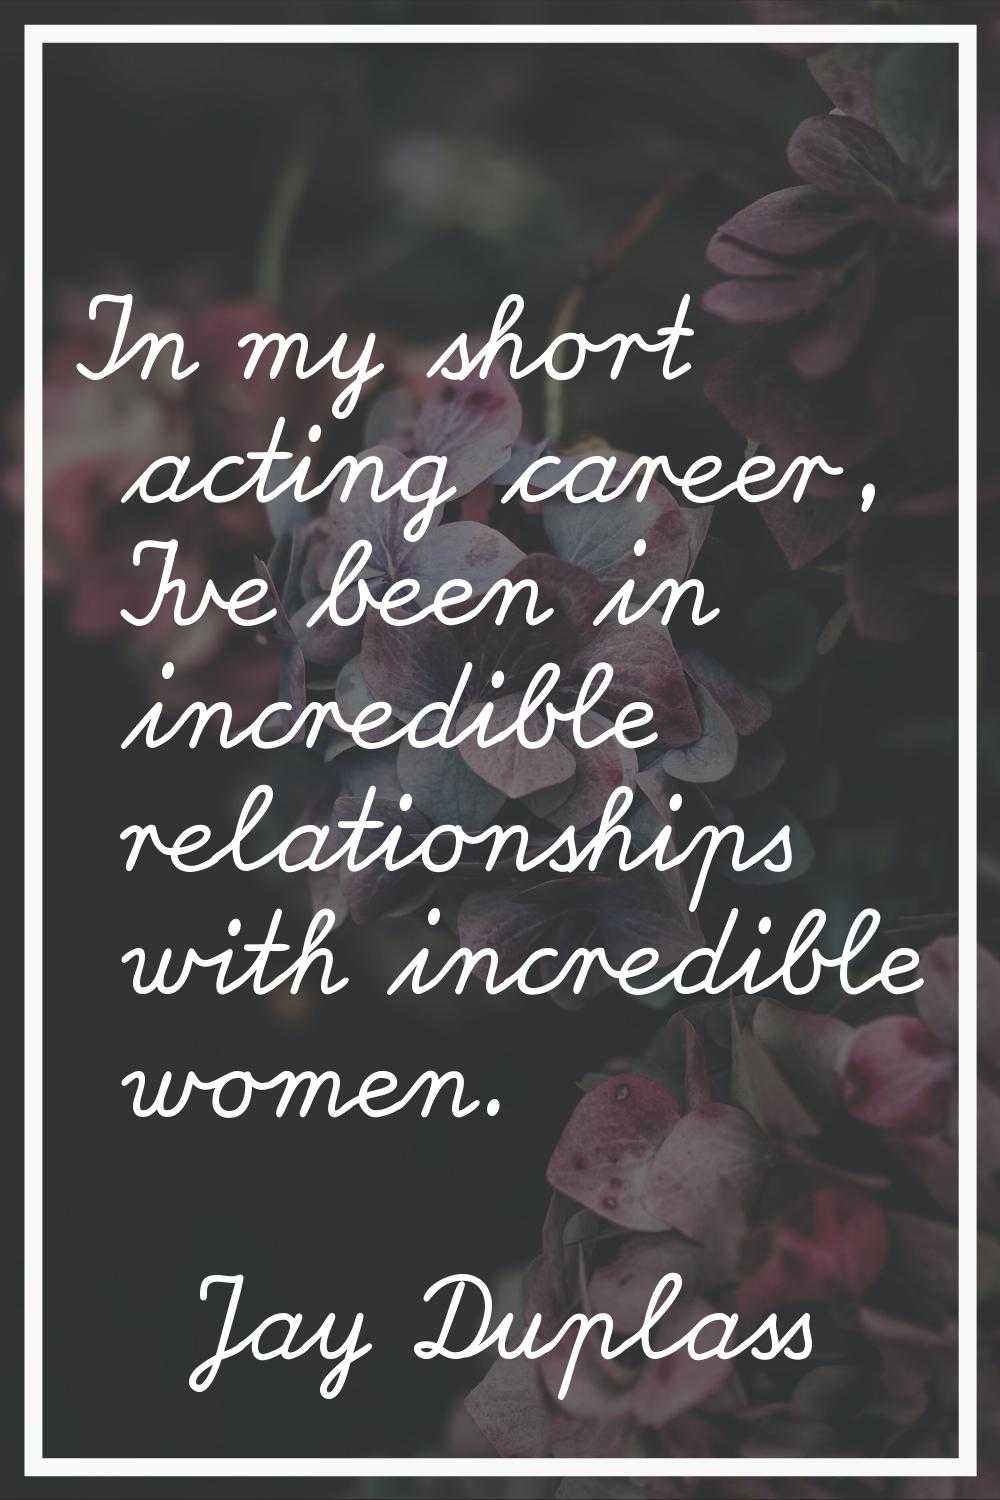 In my short acting career, I've been in incredible relationships with incredible women.